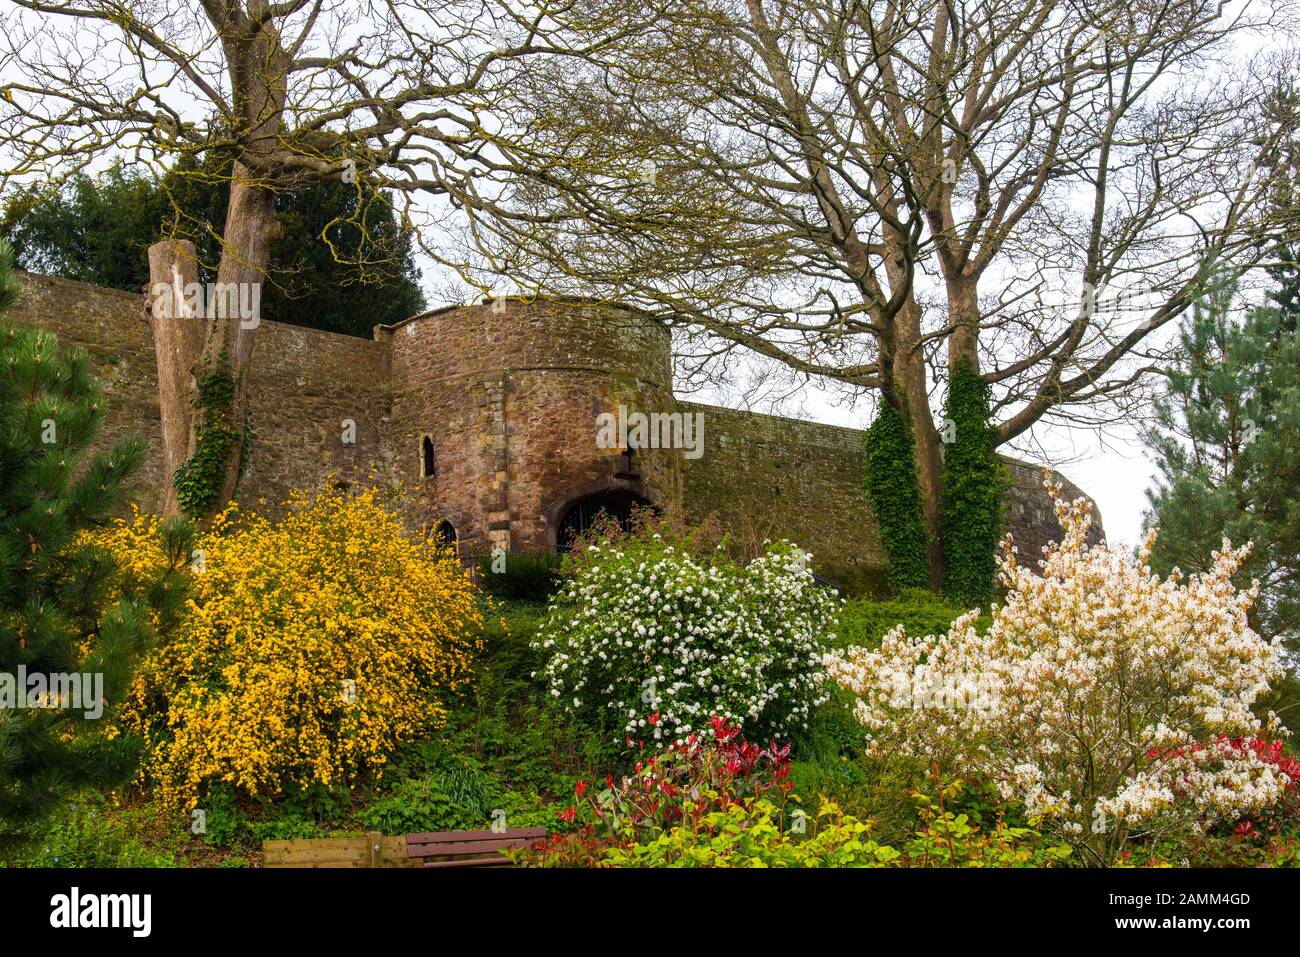 John's Tower on the City Wall, Exeter, Devon, UK. Seen from Rougemont Gardens. Stock Photo